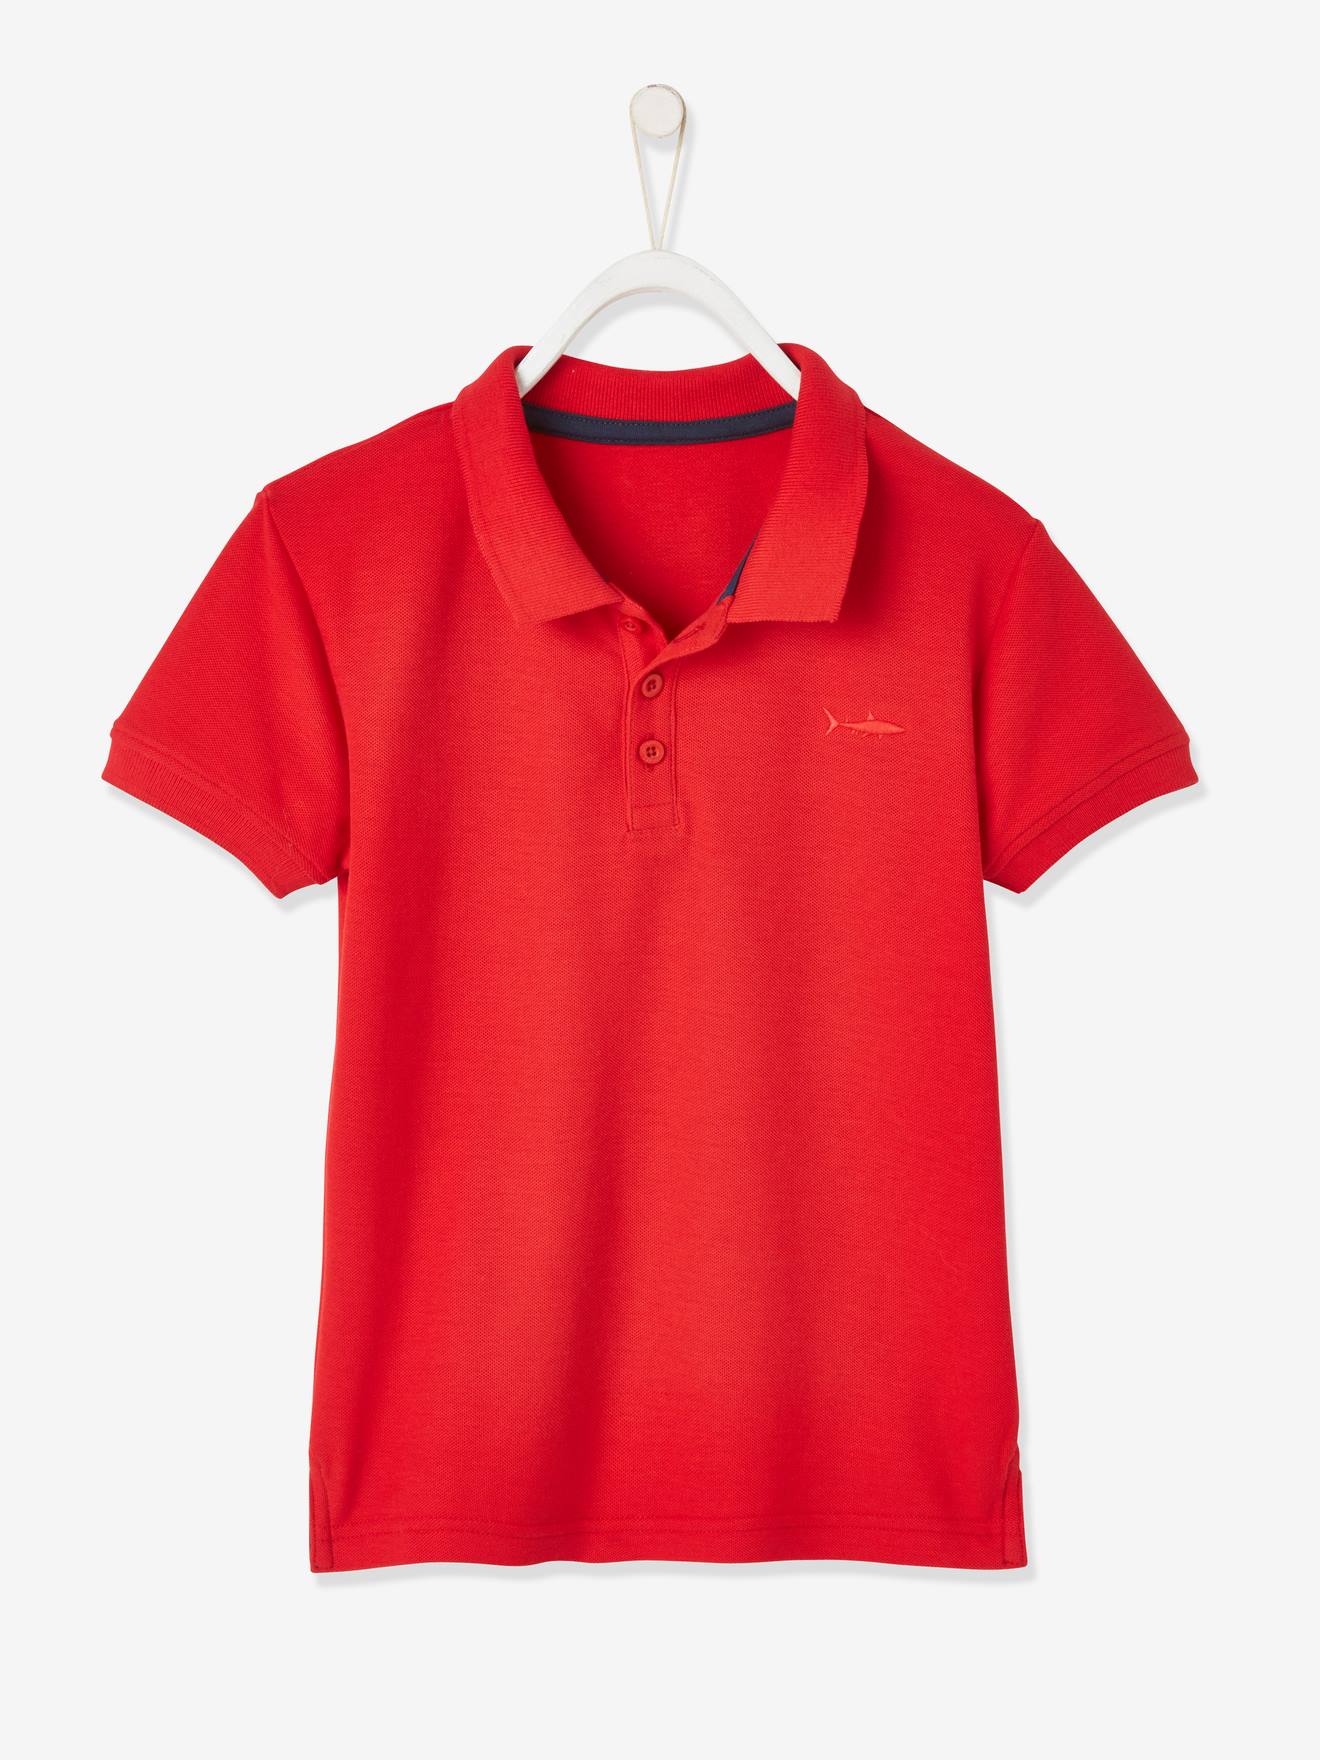 Short Sleeve Polo Shirt, Embroidery on the Chest, for Boys red